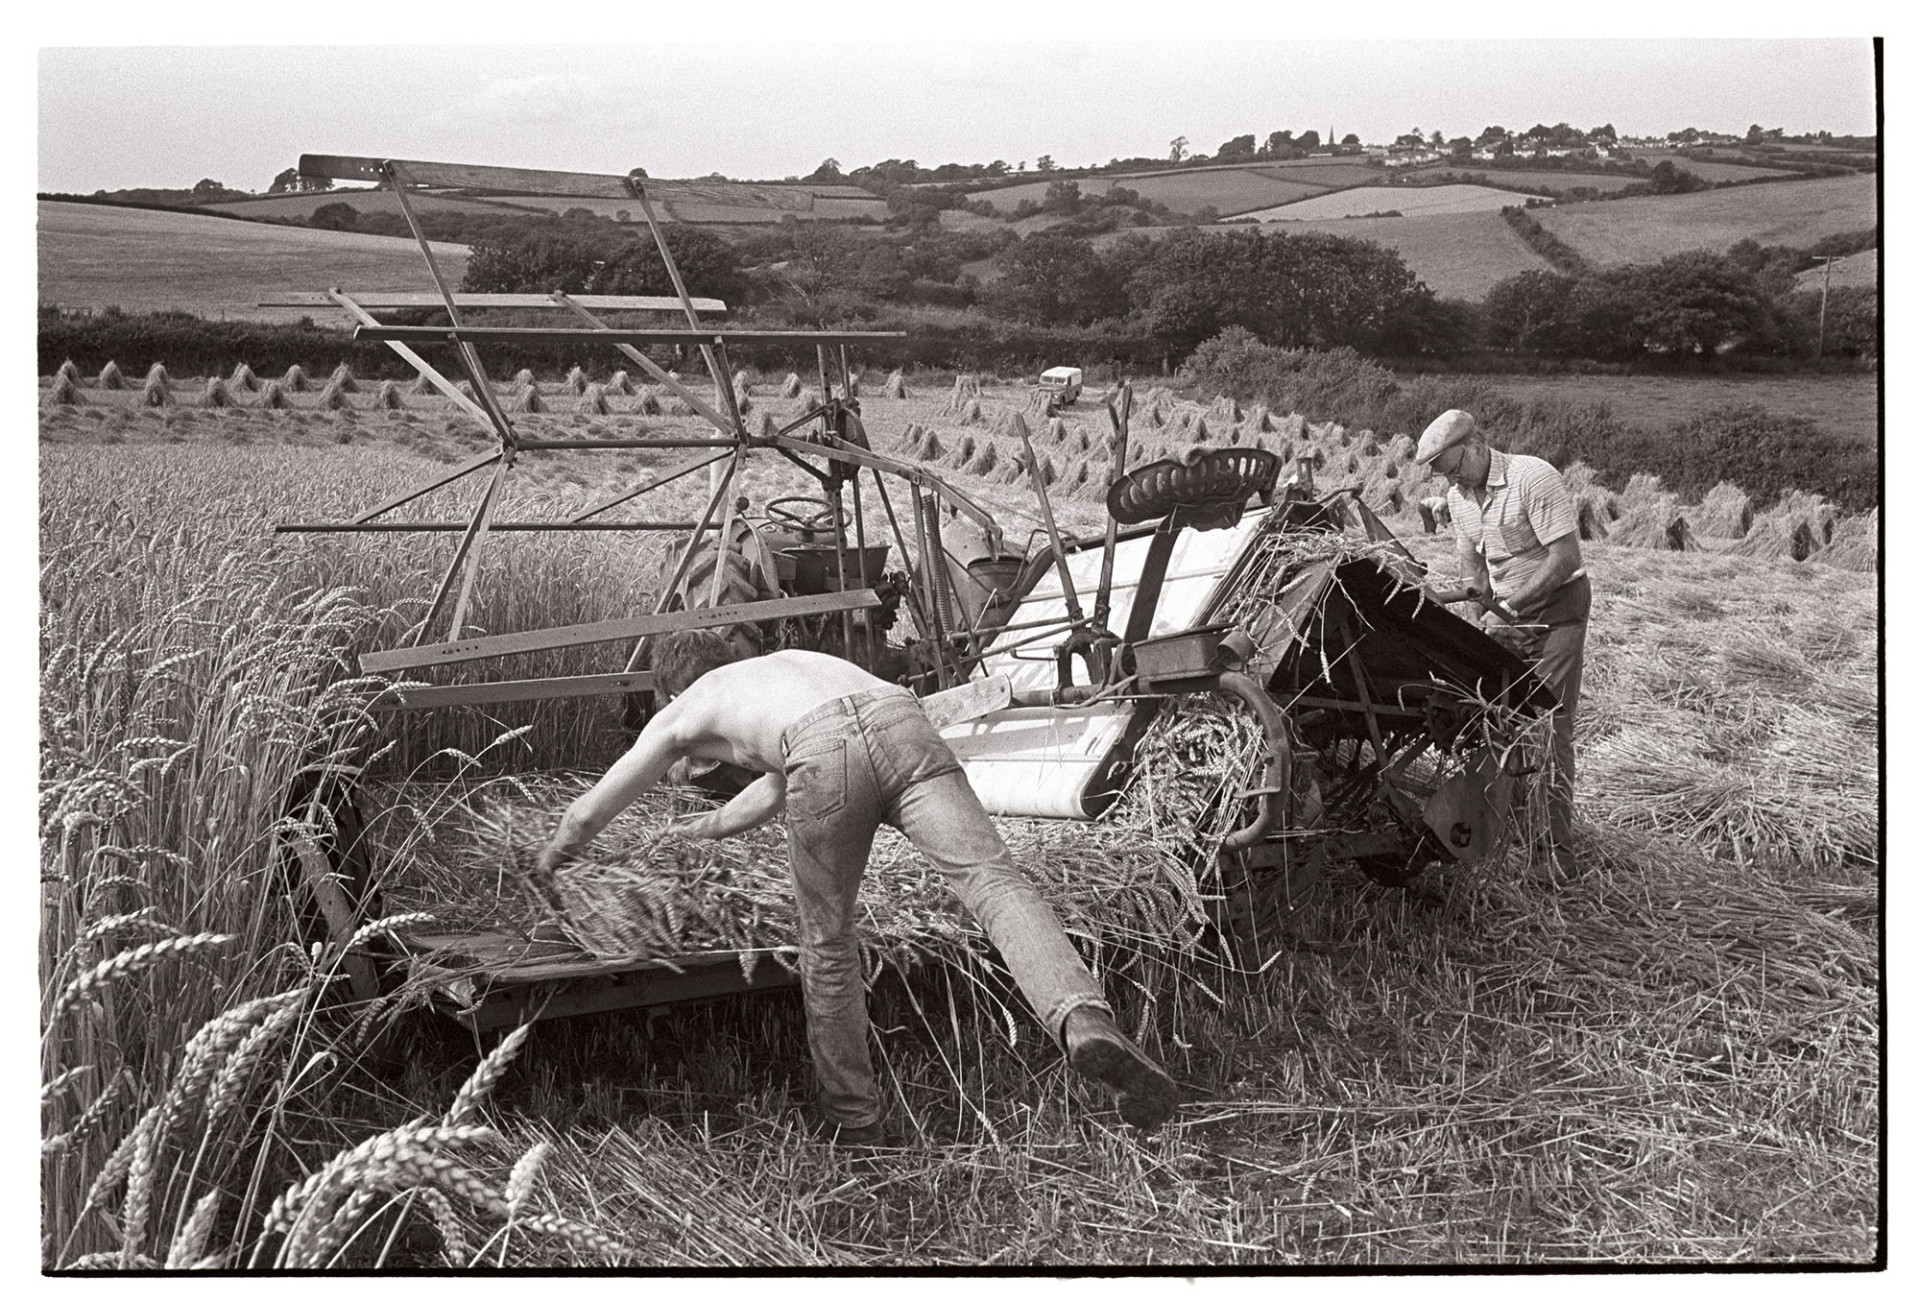 Farmers unblocking reap and binder which had jammed. 
[Two men fixing a reap and binder which had jammed while harvesting corn in a field at Spittle, Chulmleigh. Stooks of corn can be seen in the background.]